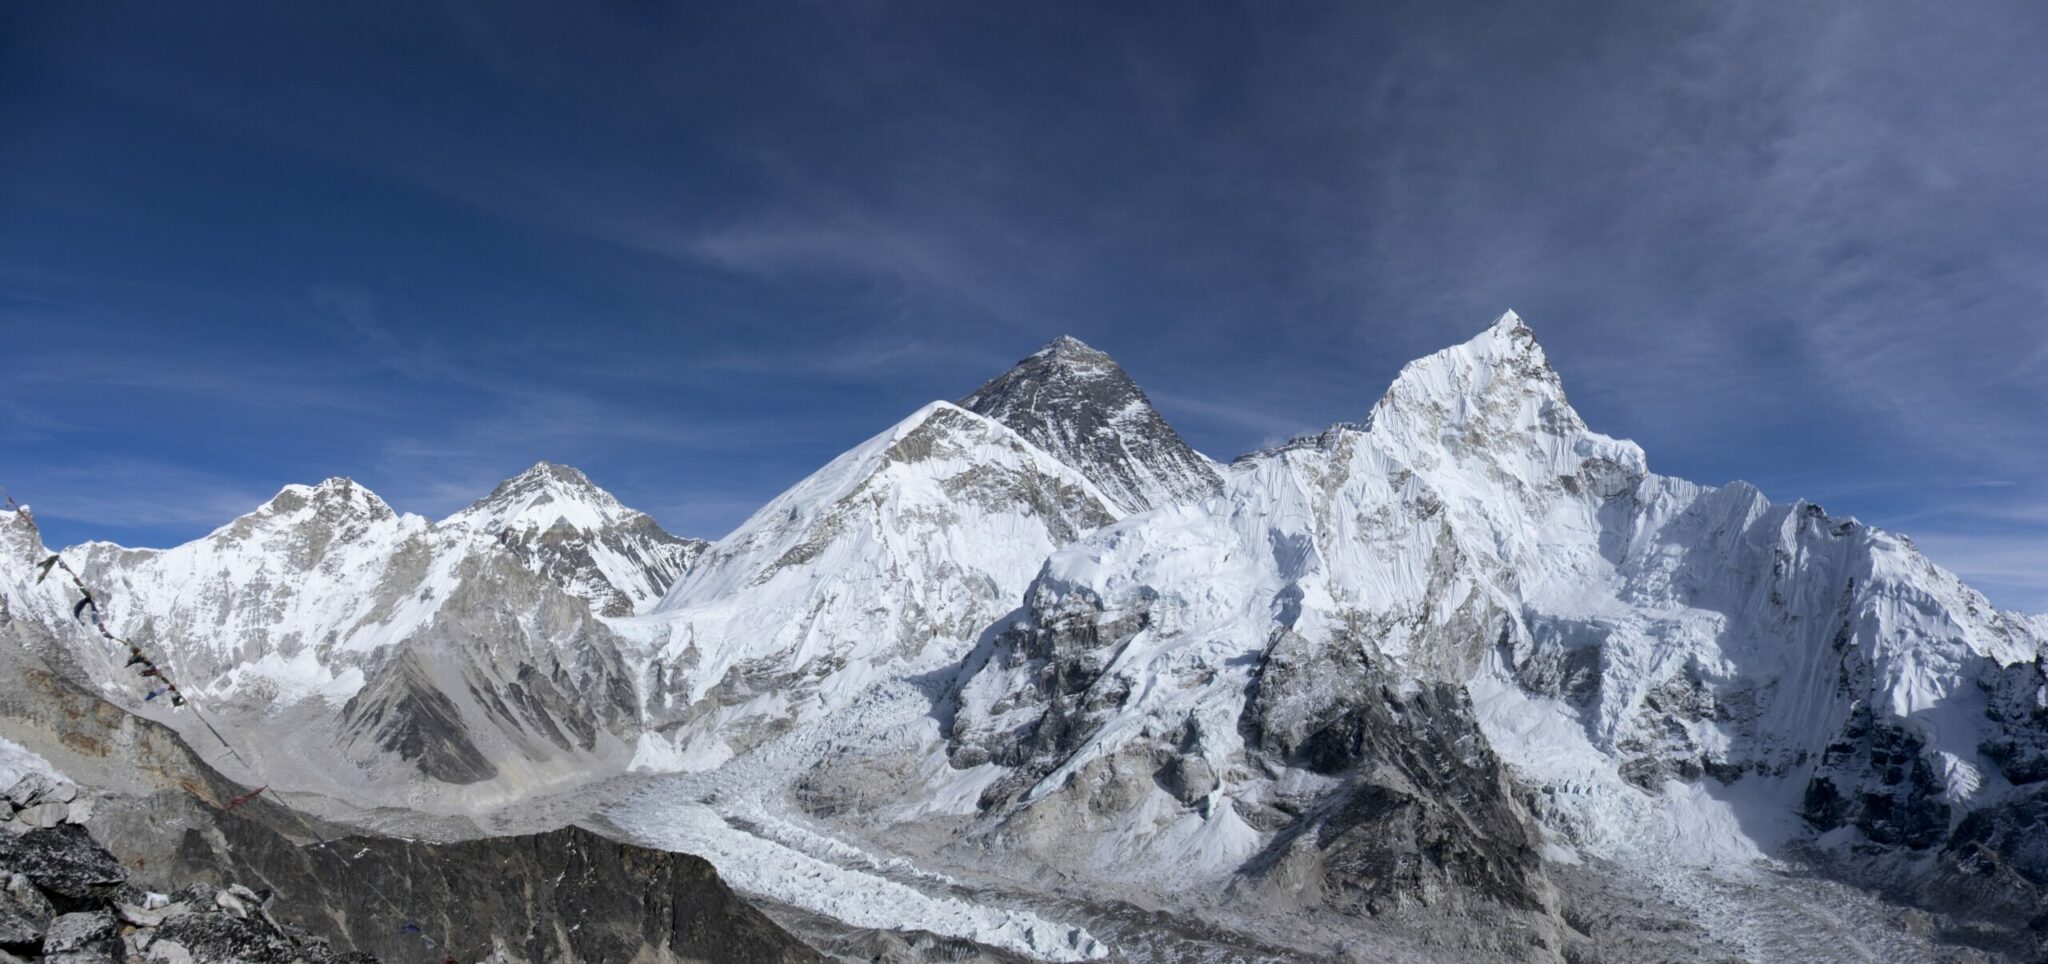 how do scientists use triangulation and trigonometry to measure the height of mountains like mount everest scaled